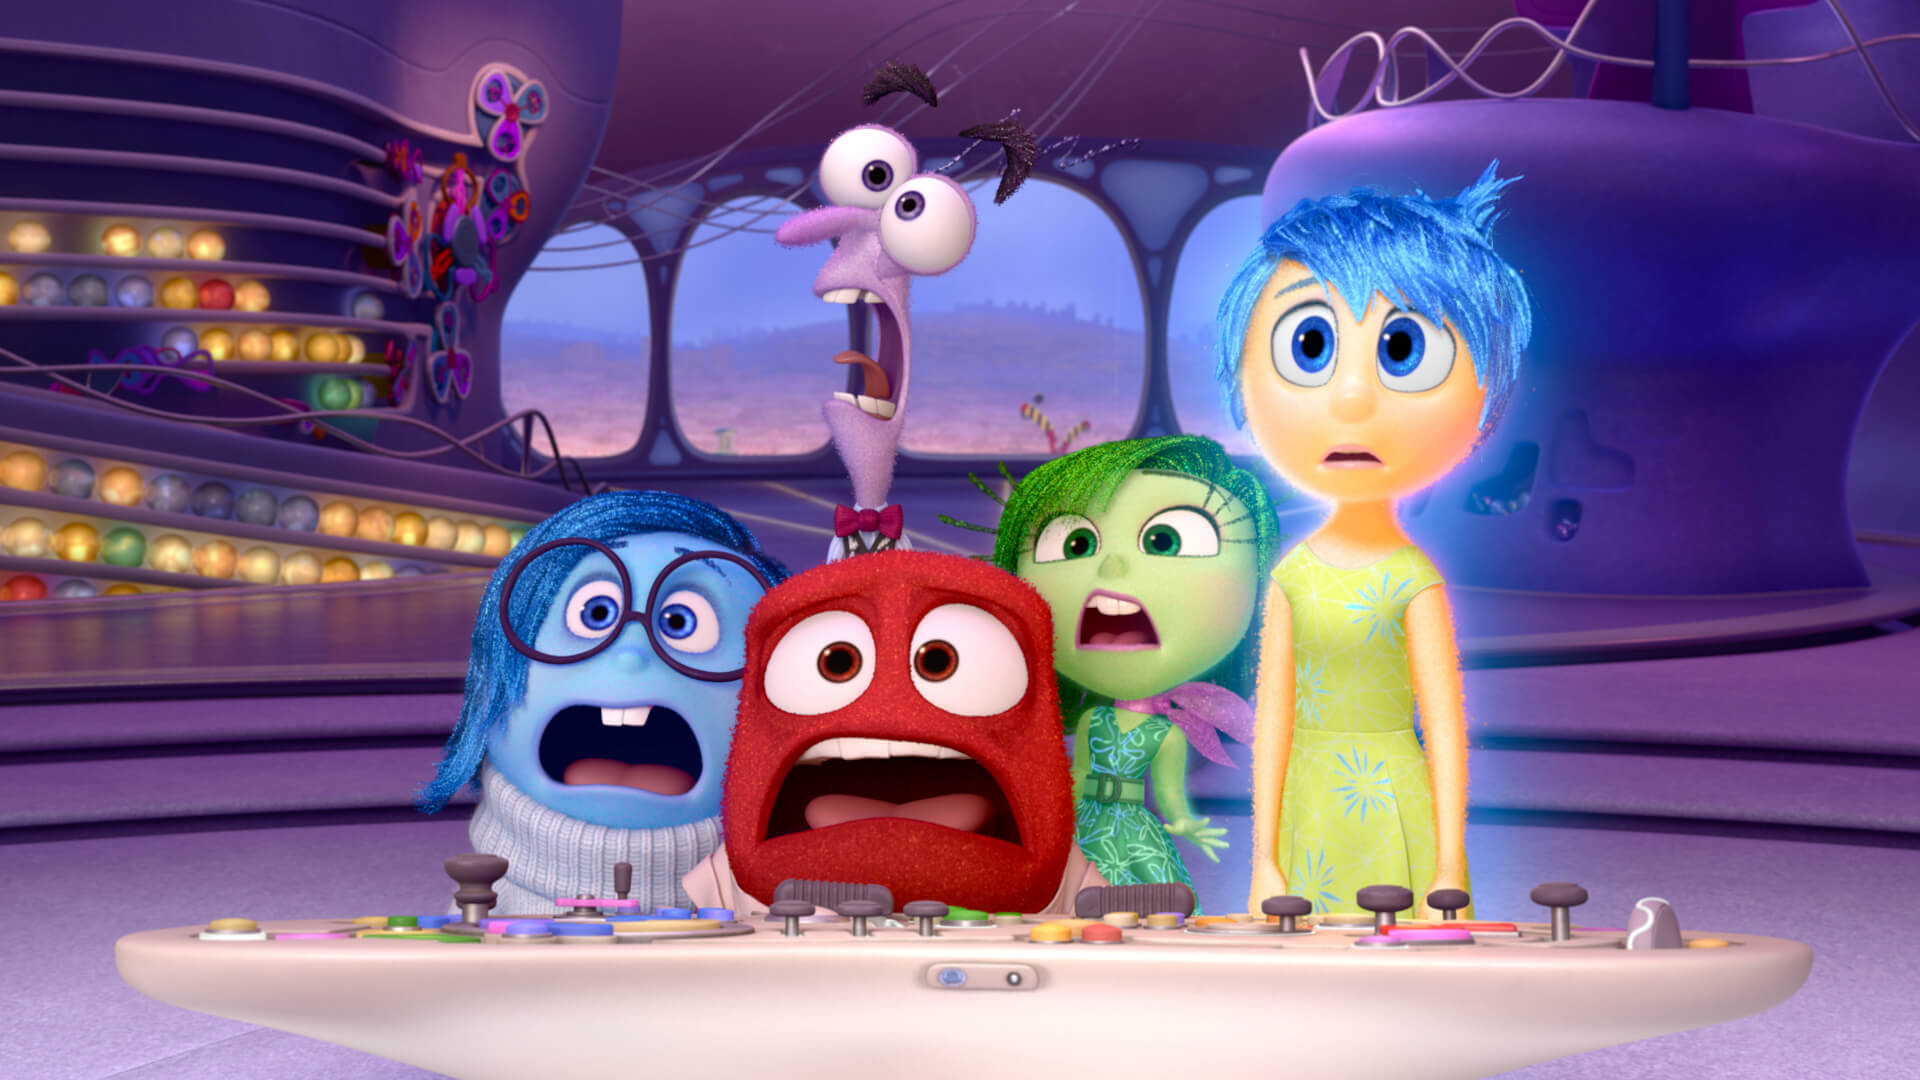 A scene from the movie Inside Out.